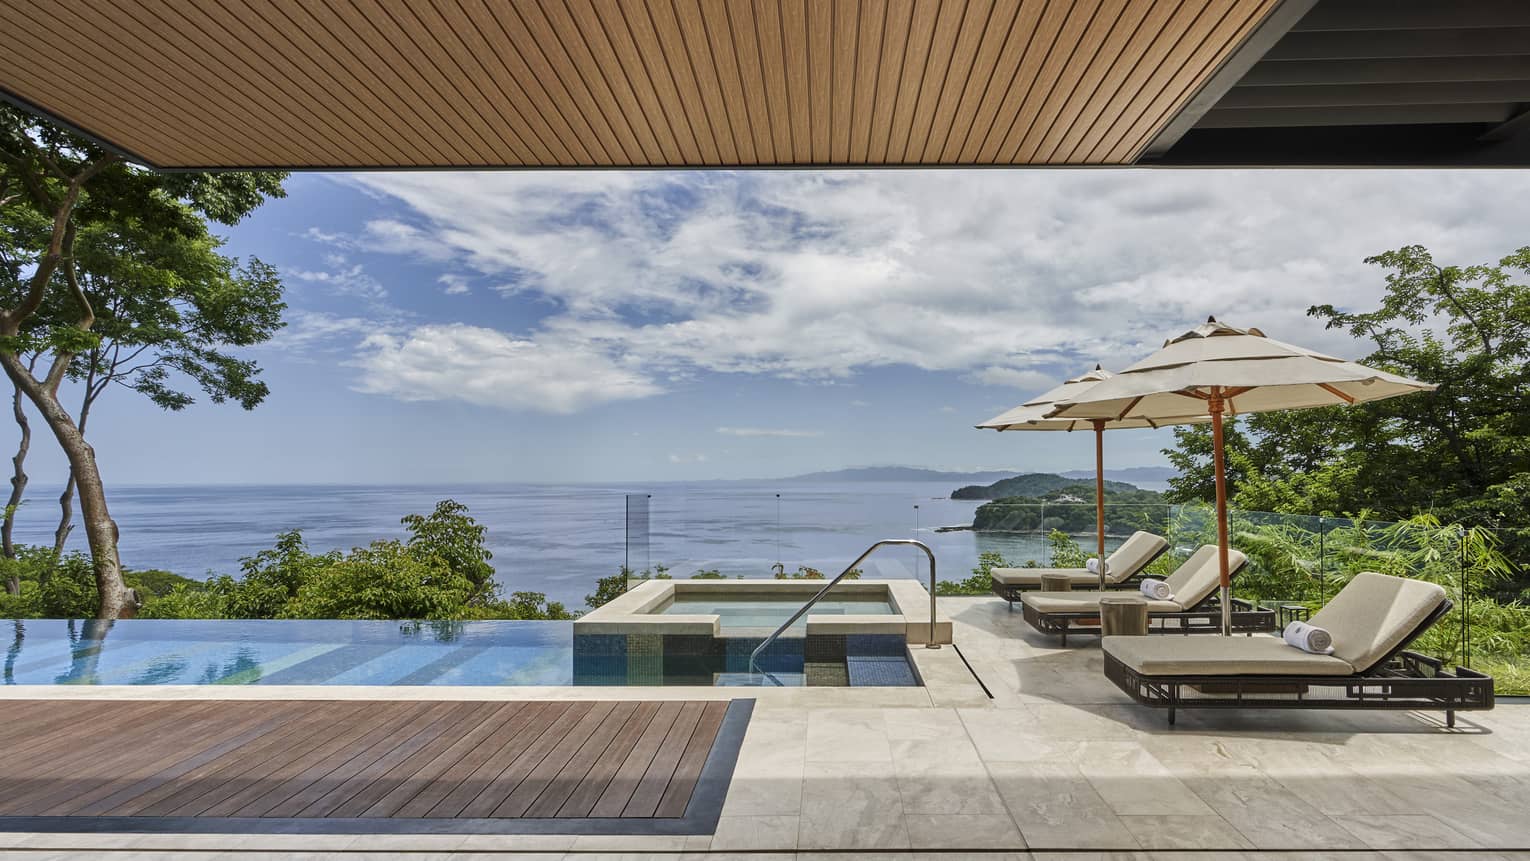 Private villa pool deck with cushioned lounge chairs, hot tub and sea view